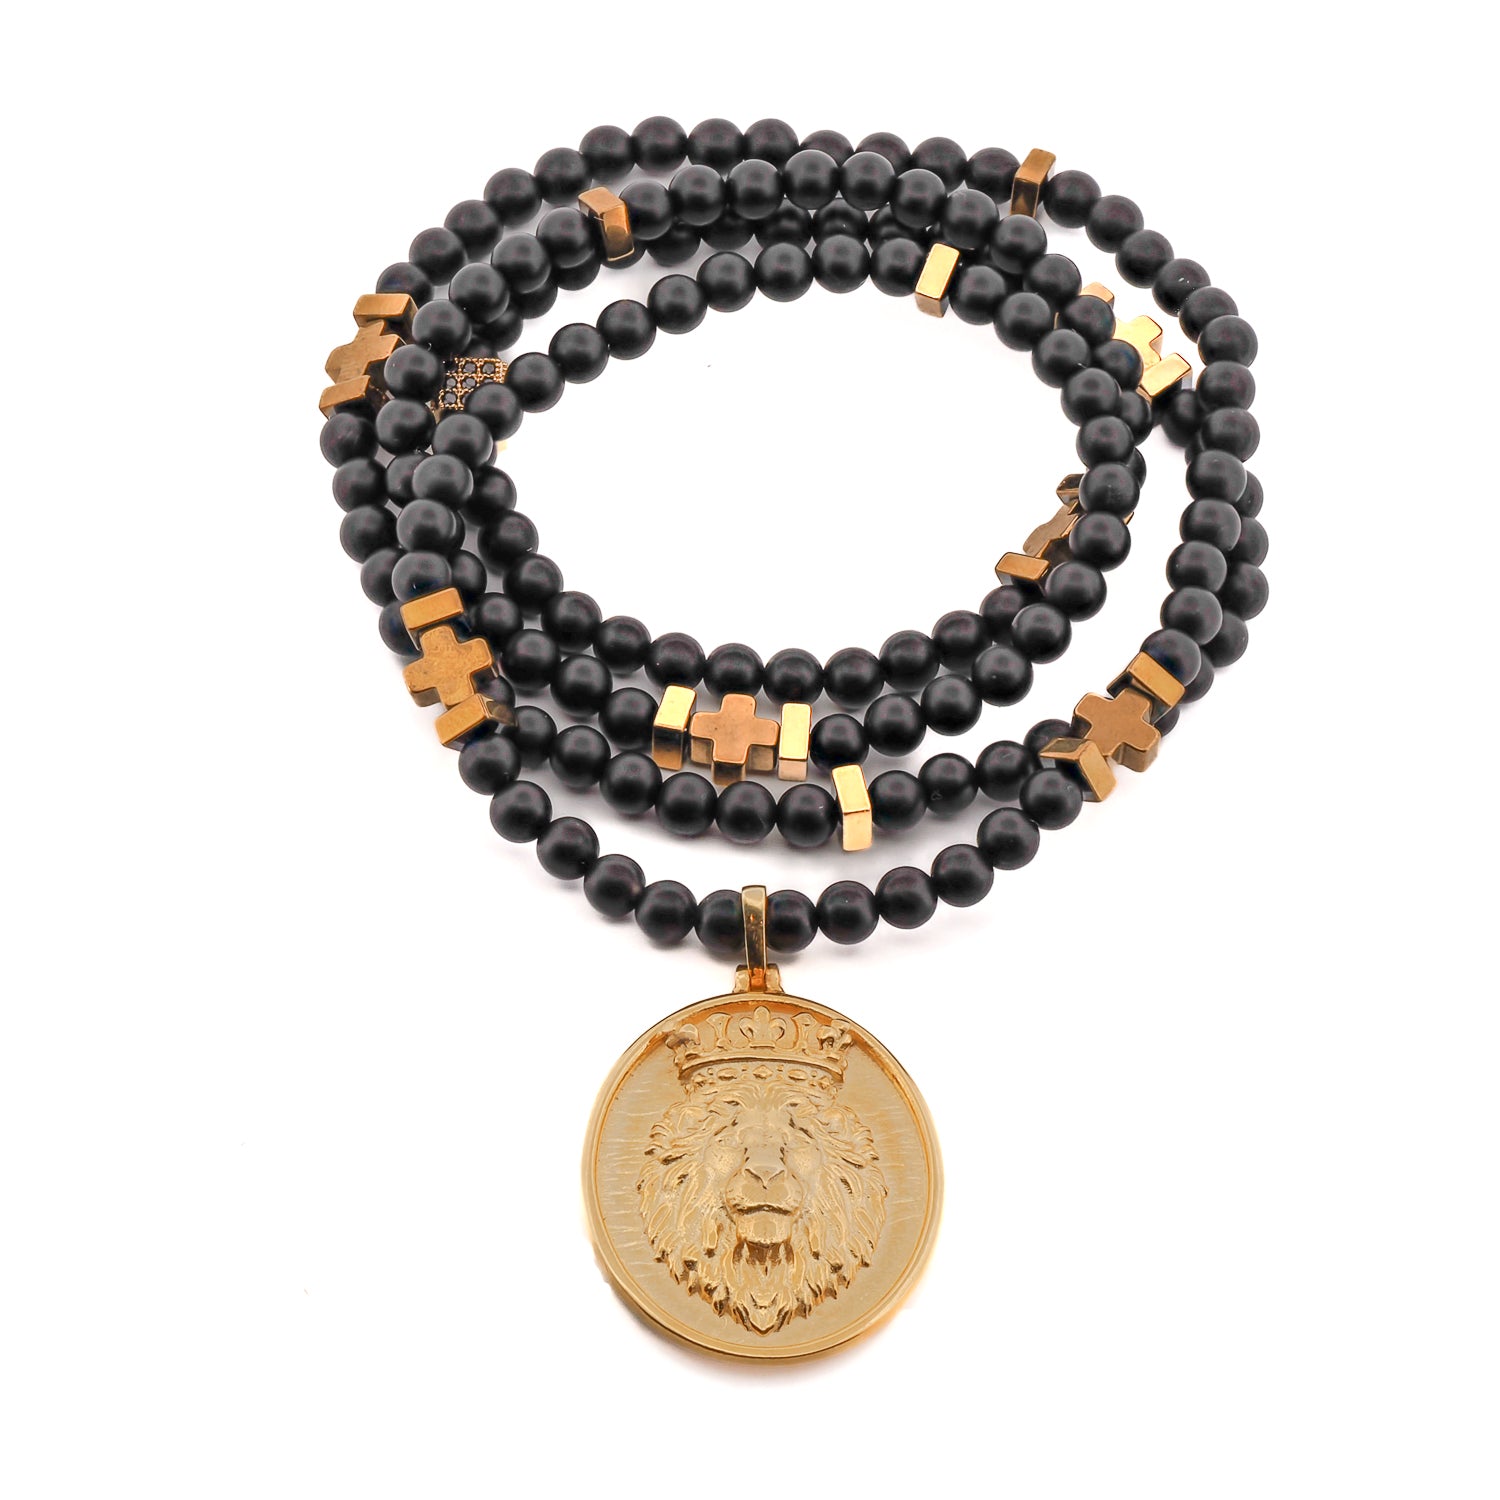 Stunning Gold Powerful Lion Pendant Black Onyx Necklace featuring 4mm black onyx stone beads and gold hematite spacers